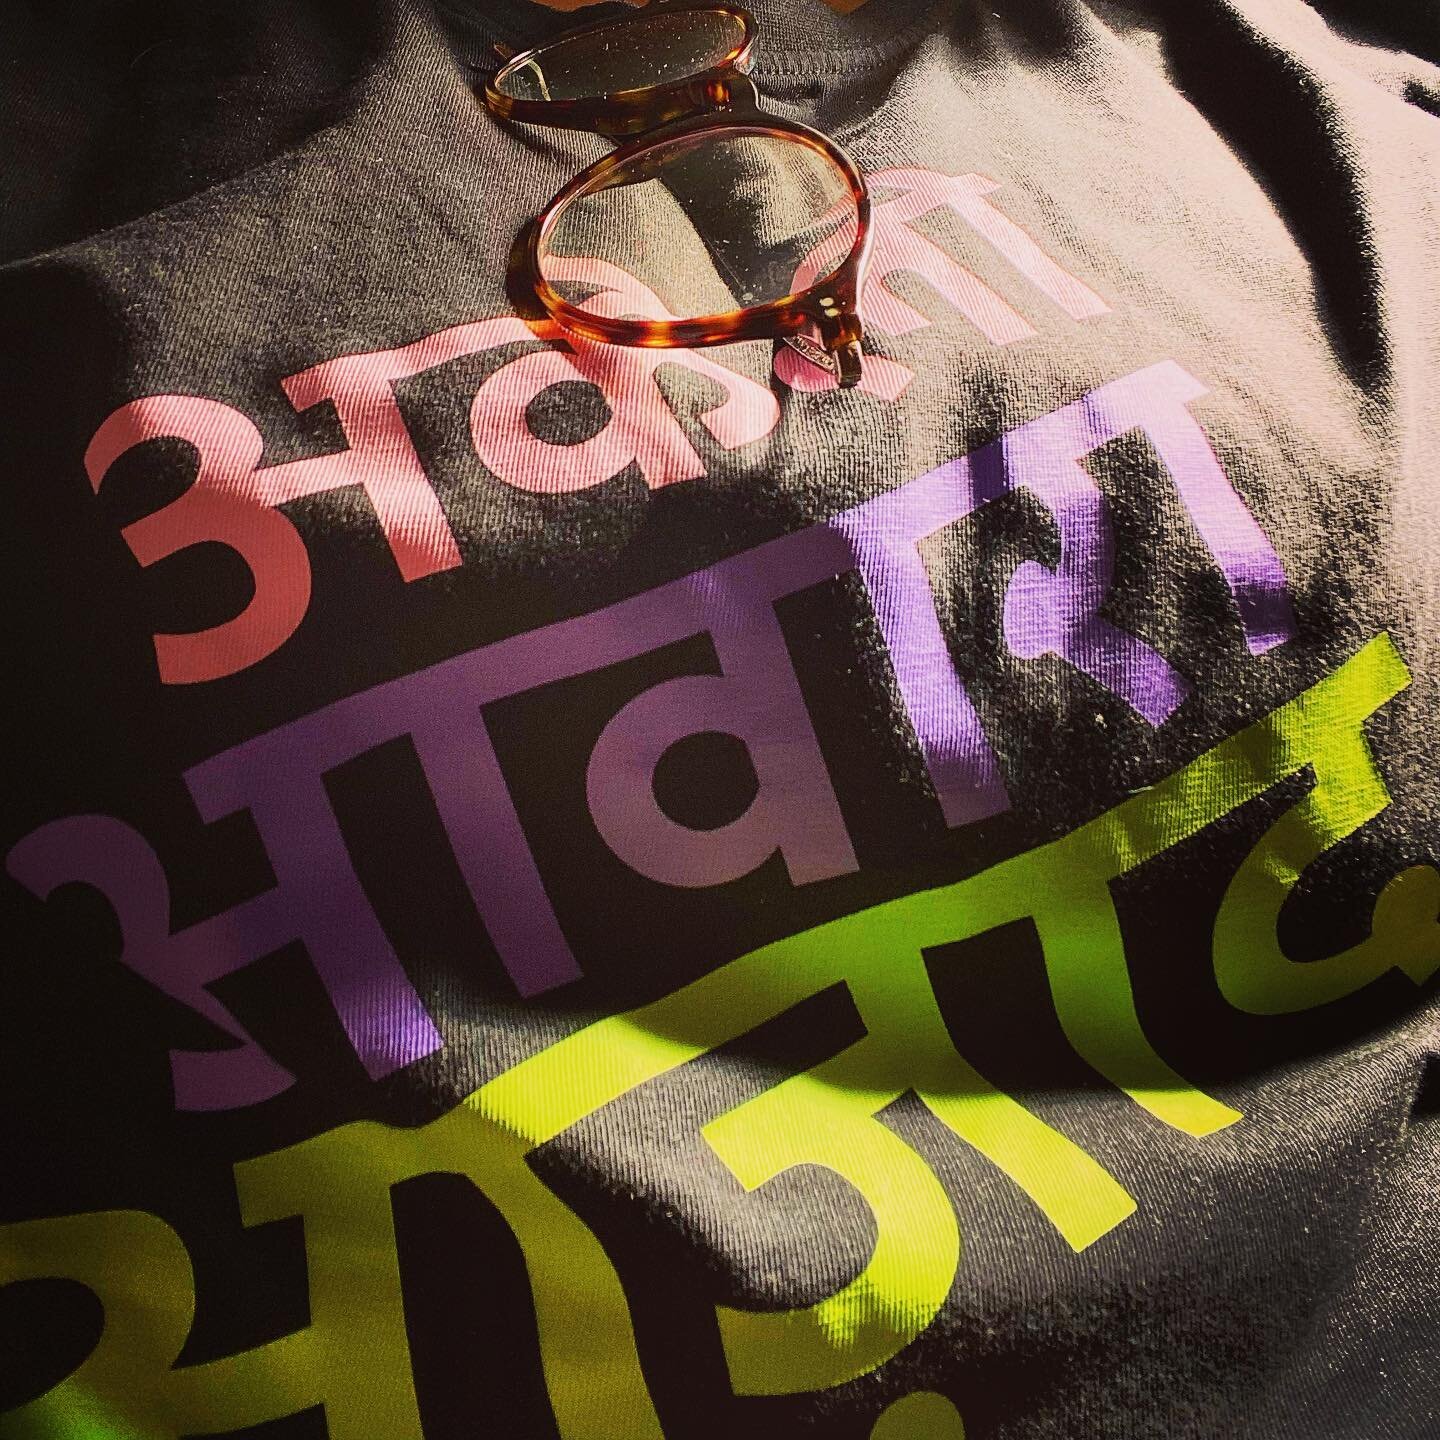 Language and performance. I purposefully wear my #akeliawaaraazaad tee especially while commuting. There have been solidarity glances. Conversations especially in the closed - women only- section of an airport security check in. There is the awkward 